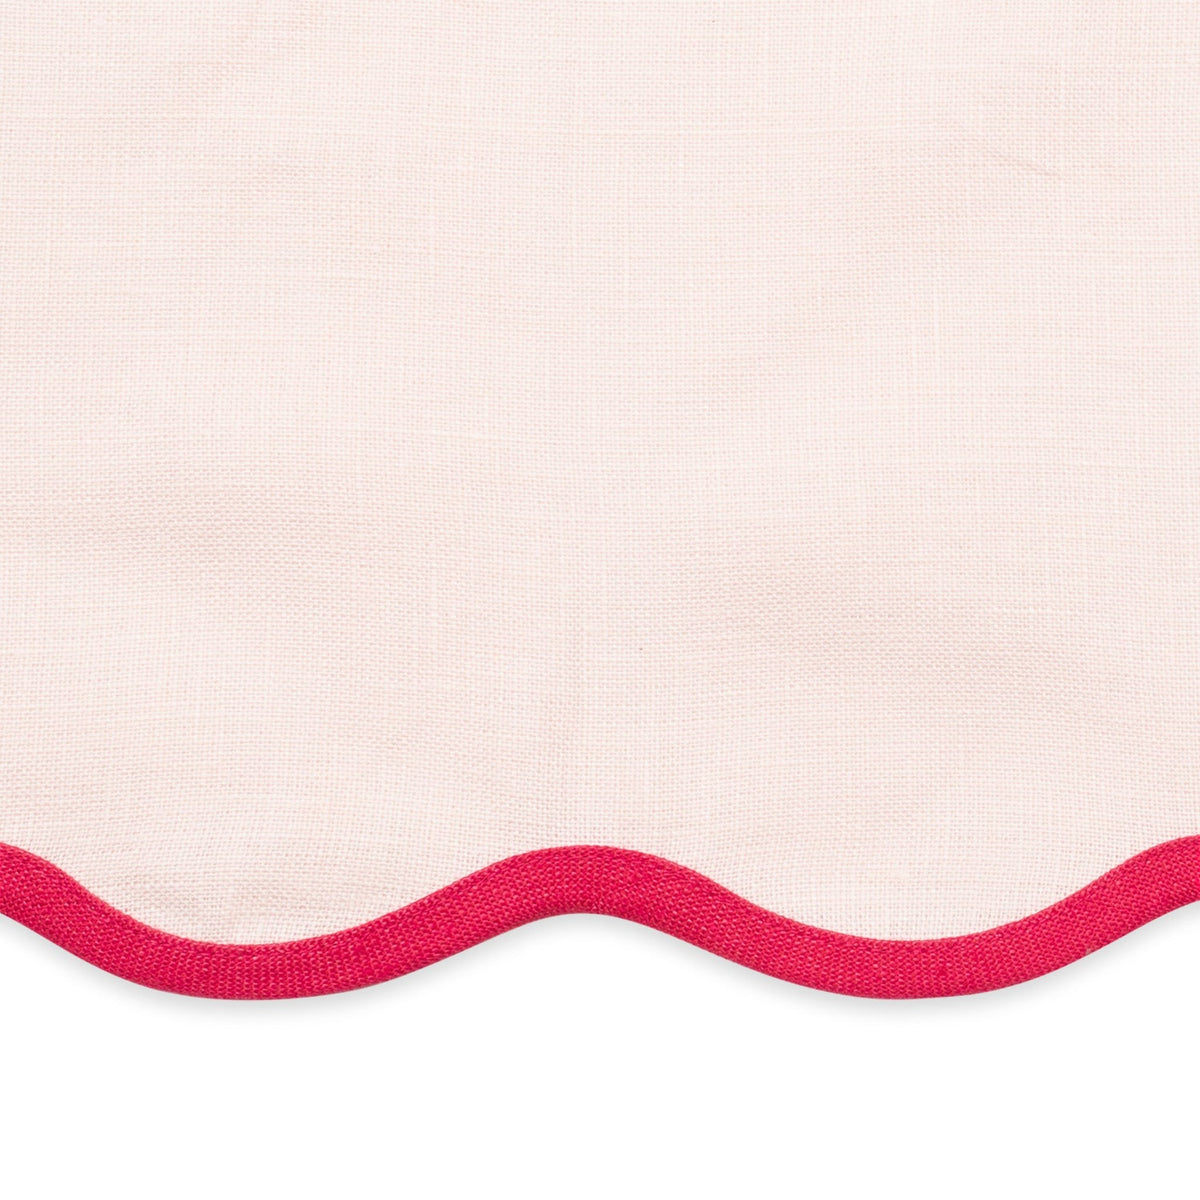 Swatch Sample of Matouk Scallop Edge Table Linens in Pink/Azalea Color